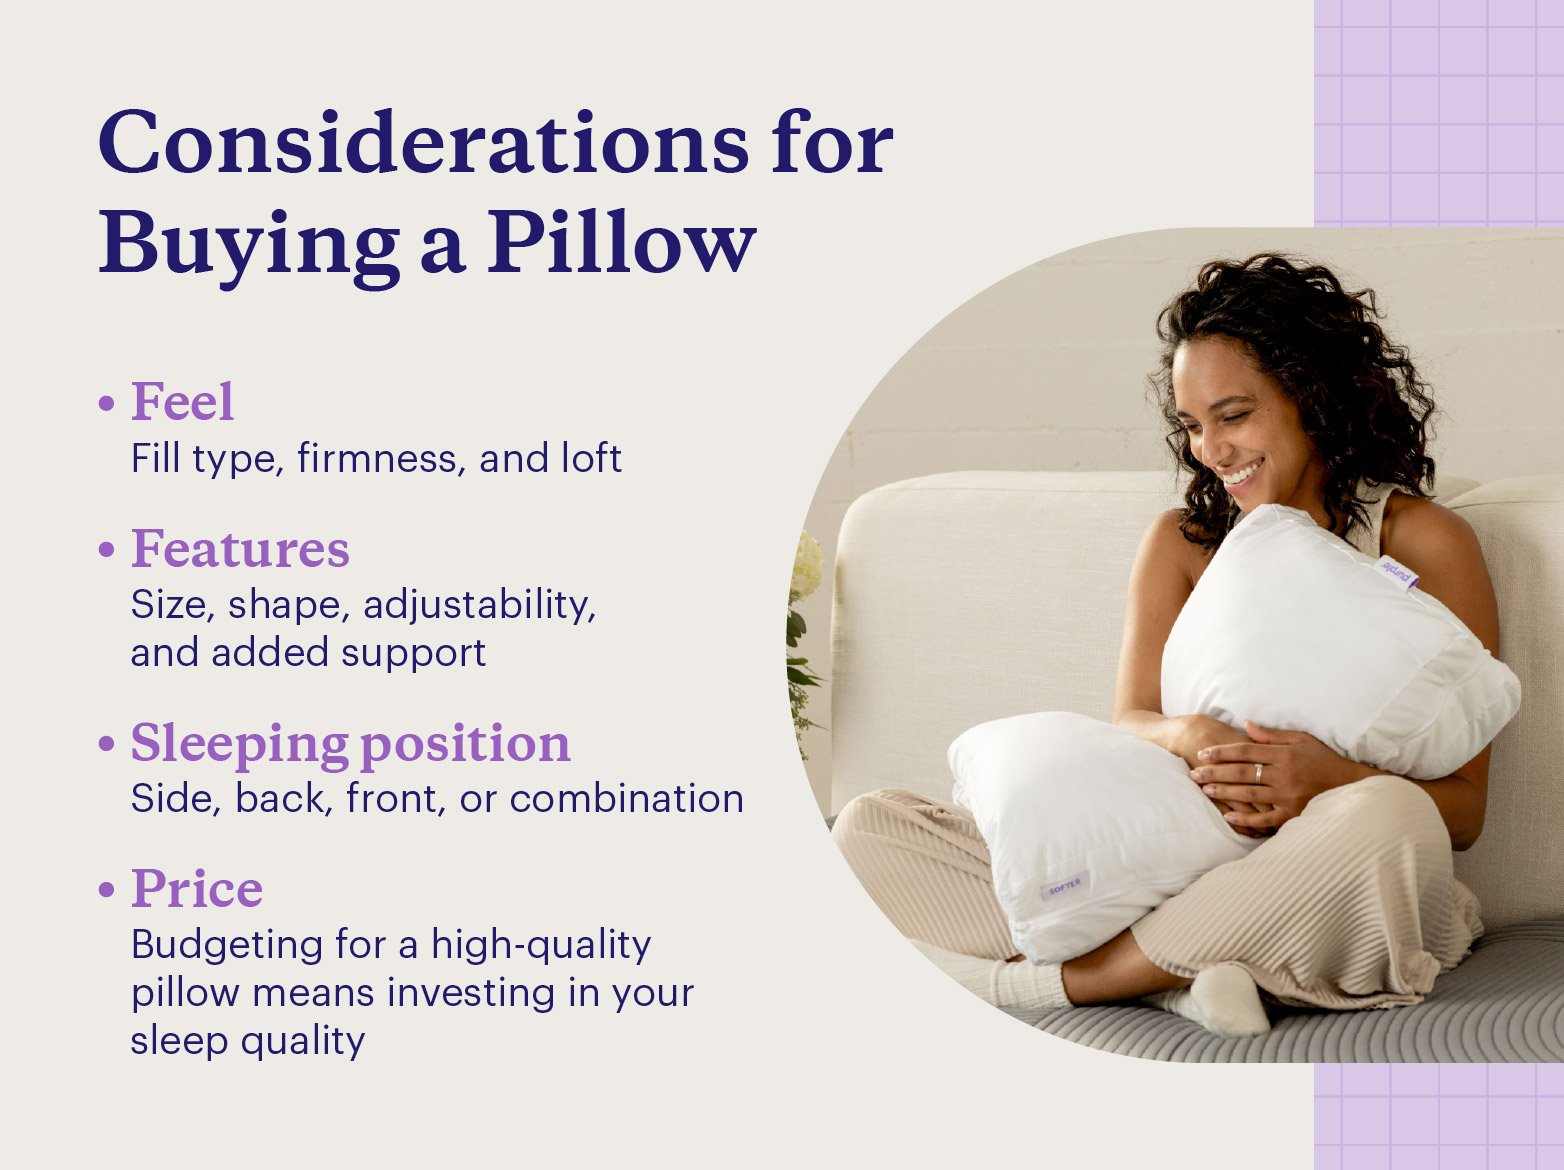 Four considerations for buying a pillow.